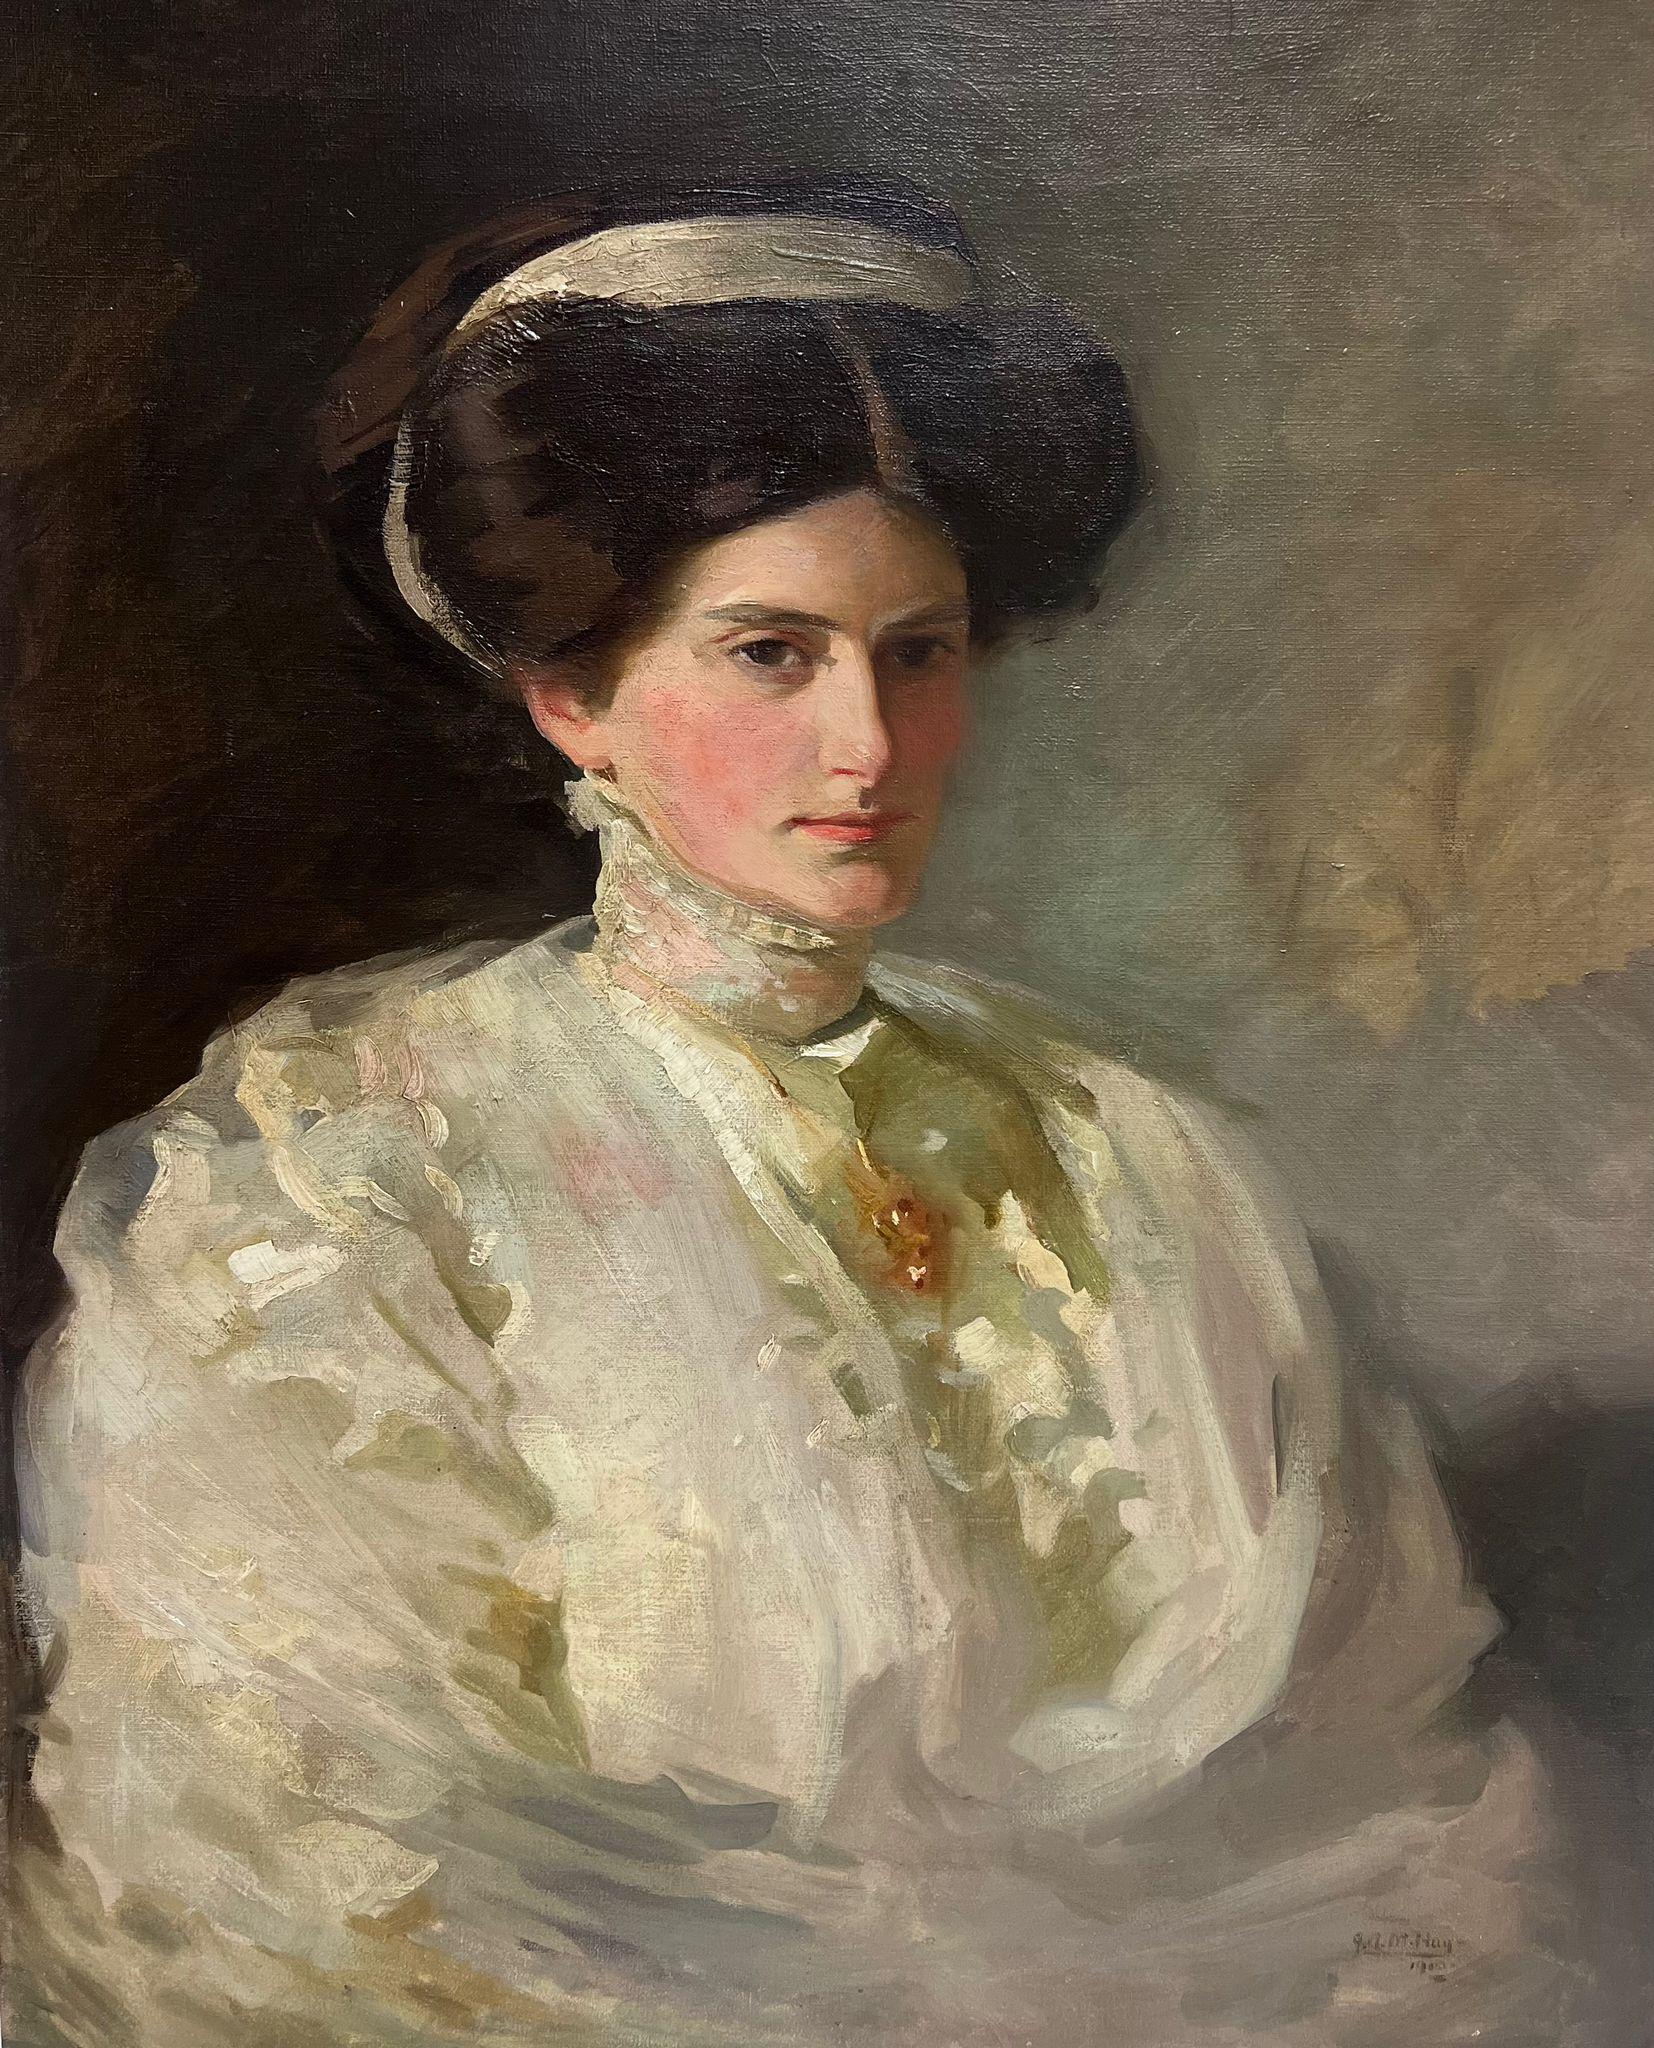 Portrait of an Elegant Lady
by John Arthur Machray Hay (Scottish, 1887-1960)
signed and dated 1910
oil on canvas, unframed
canvas: 30 x 24 inches
provenance: private collection, UK
condition: very good and sound condition 

Portrait painter, born in